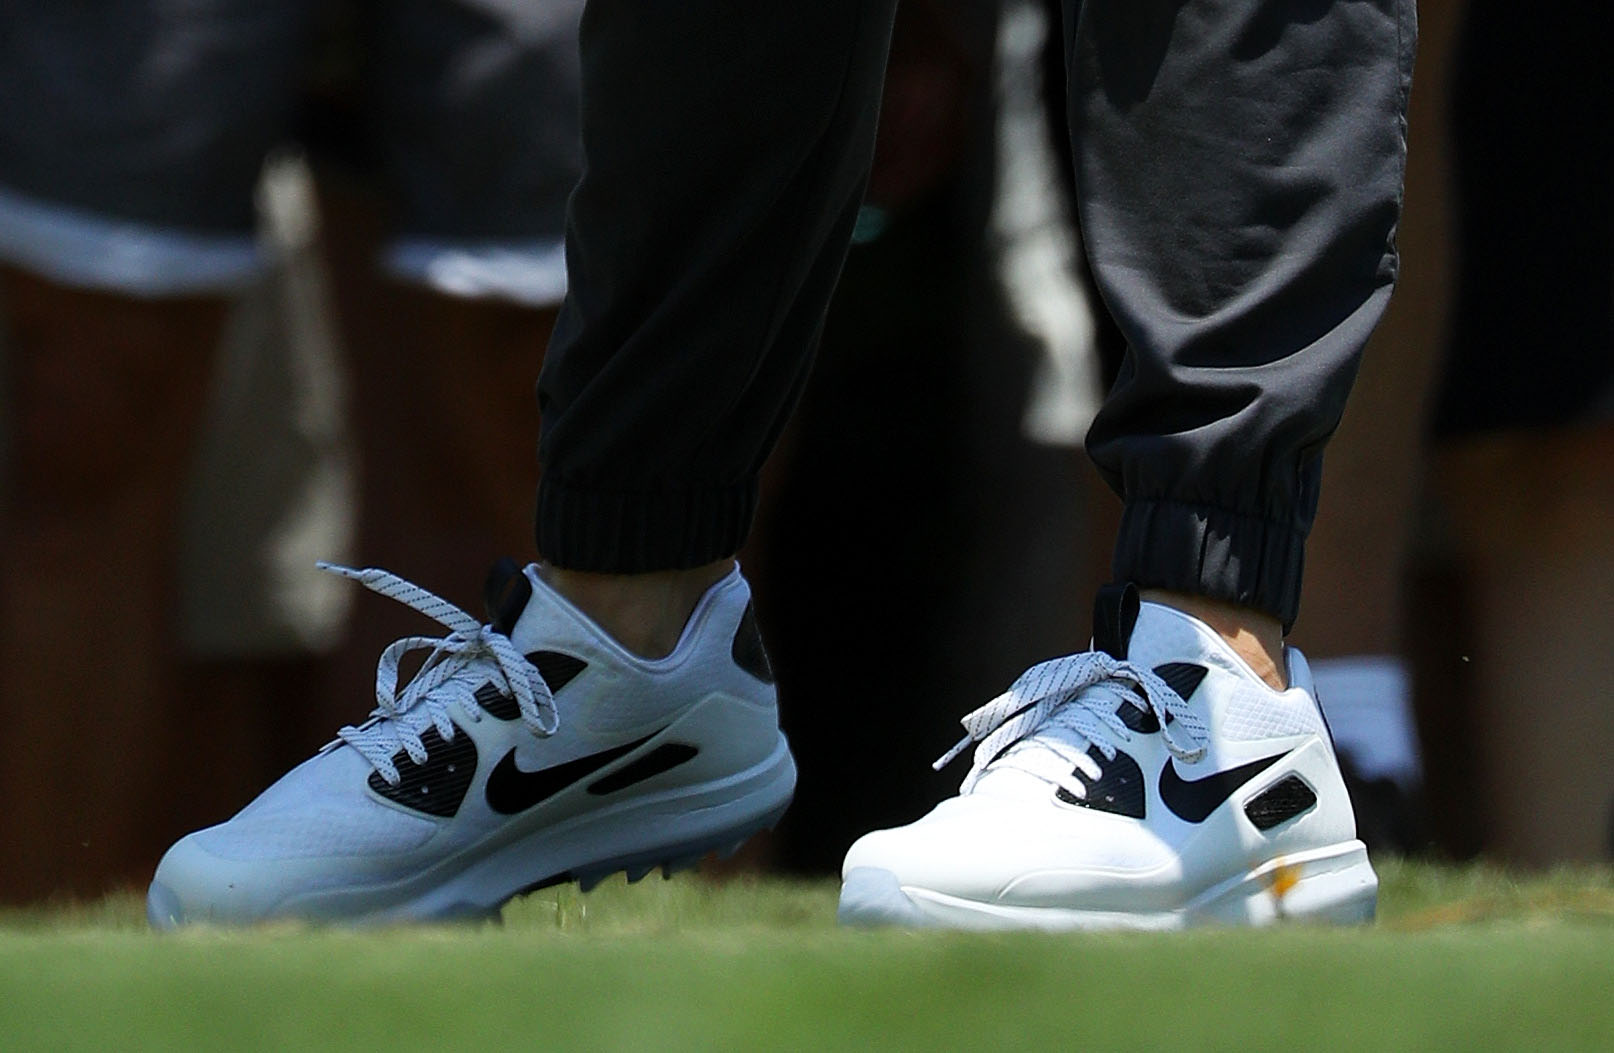 Rory rolls out the joggers. Do we have a trend?